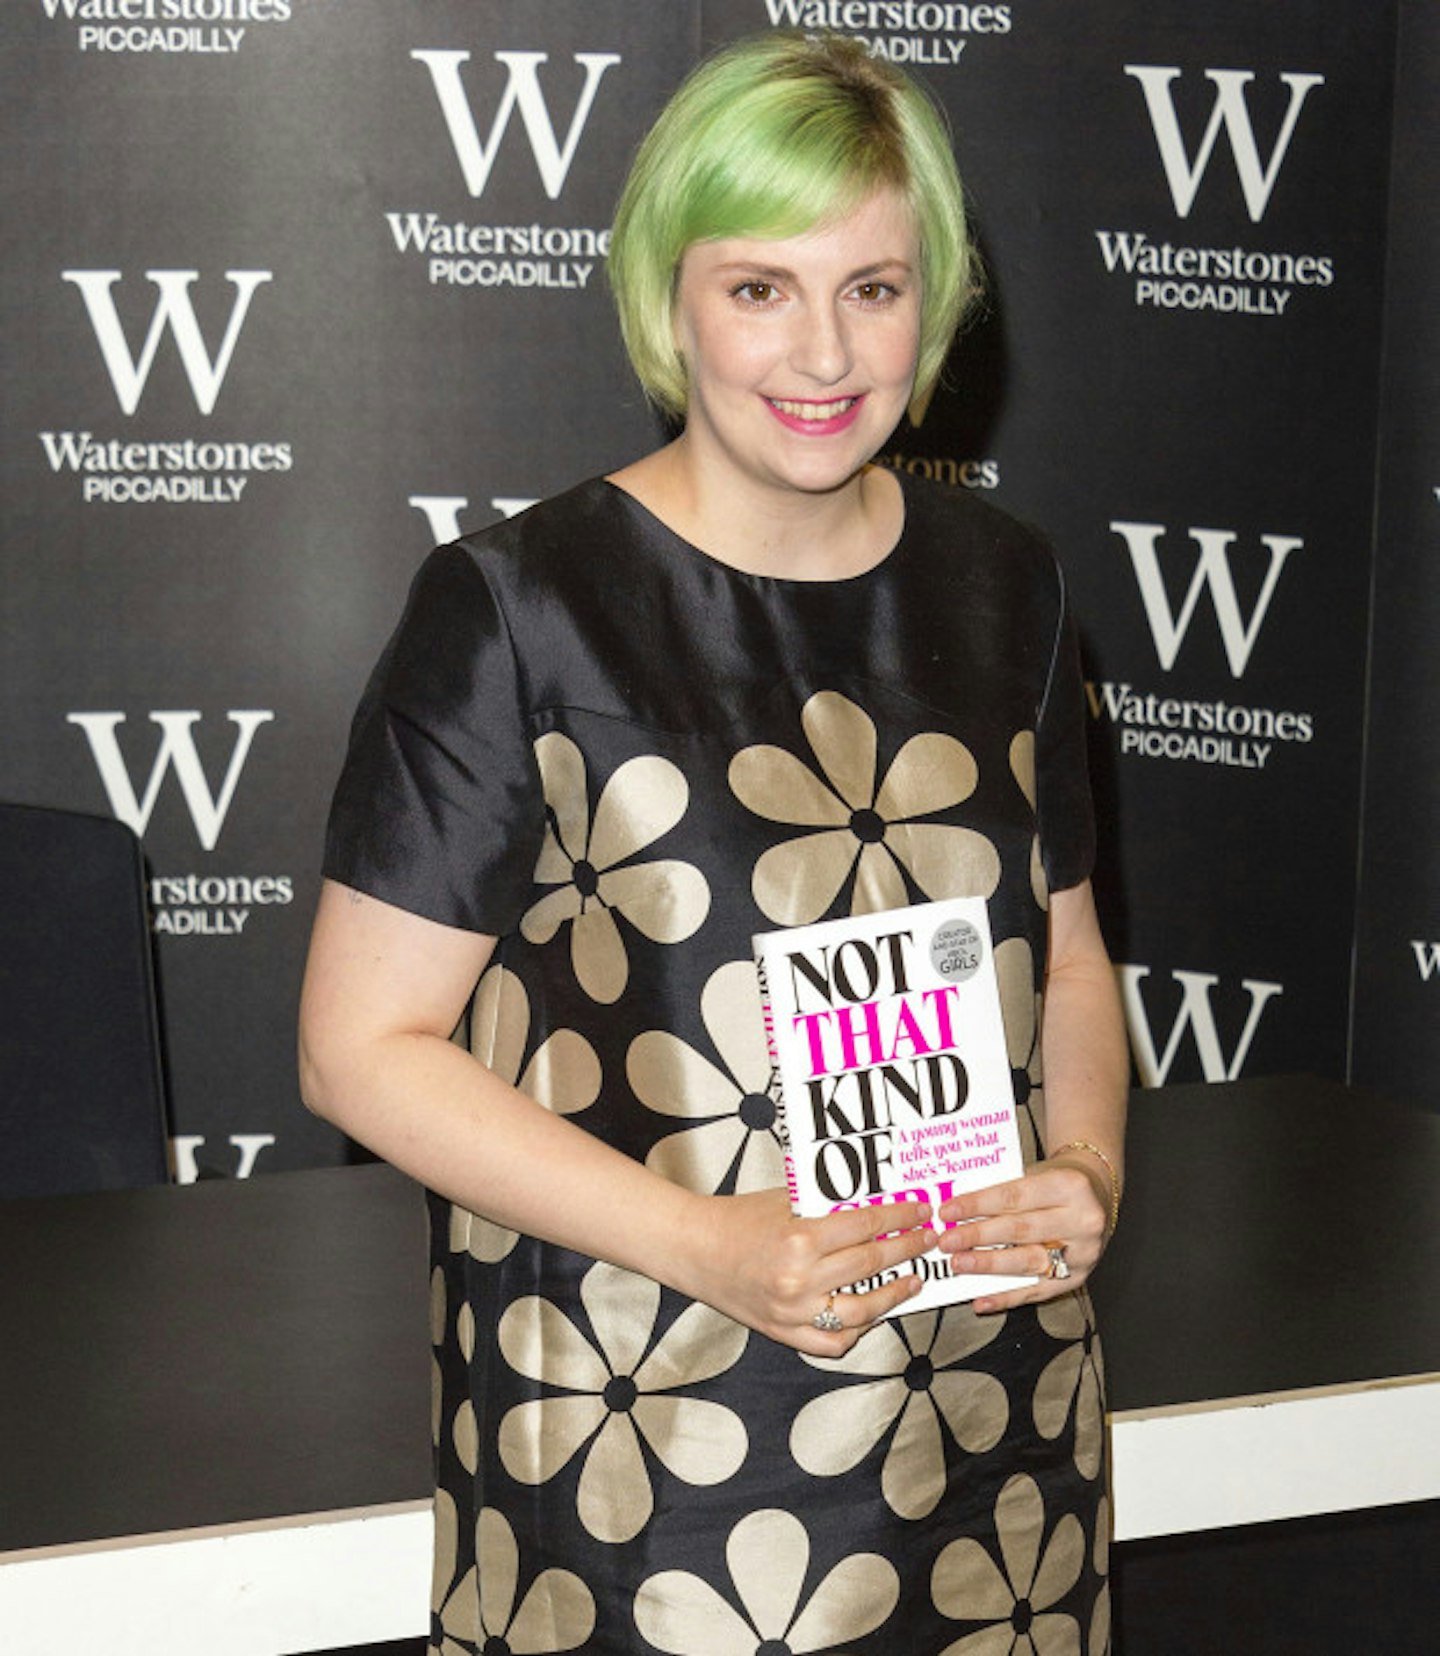 Lena at her book signing in London